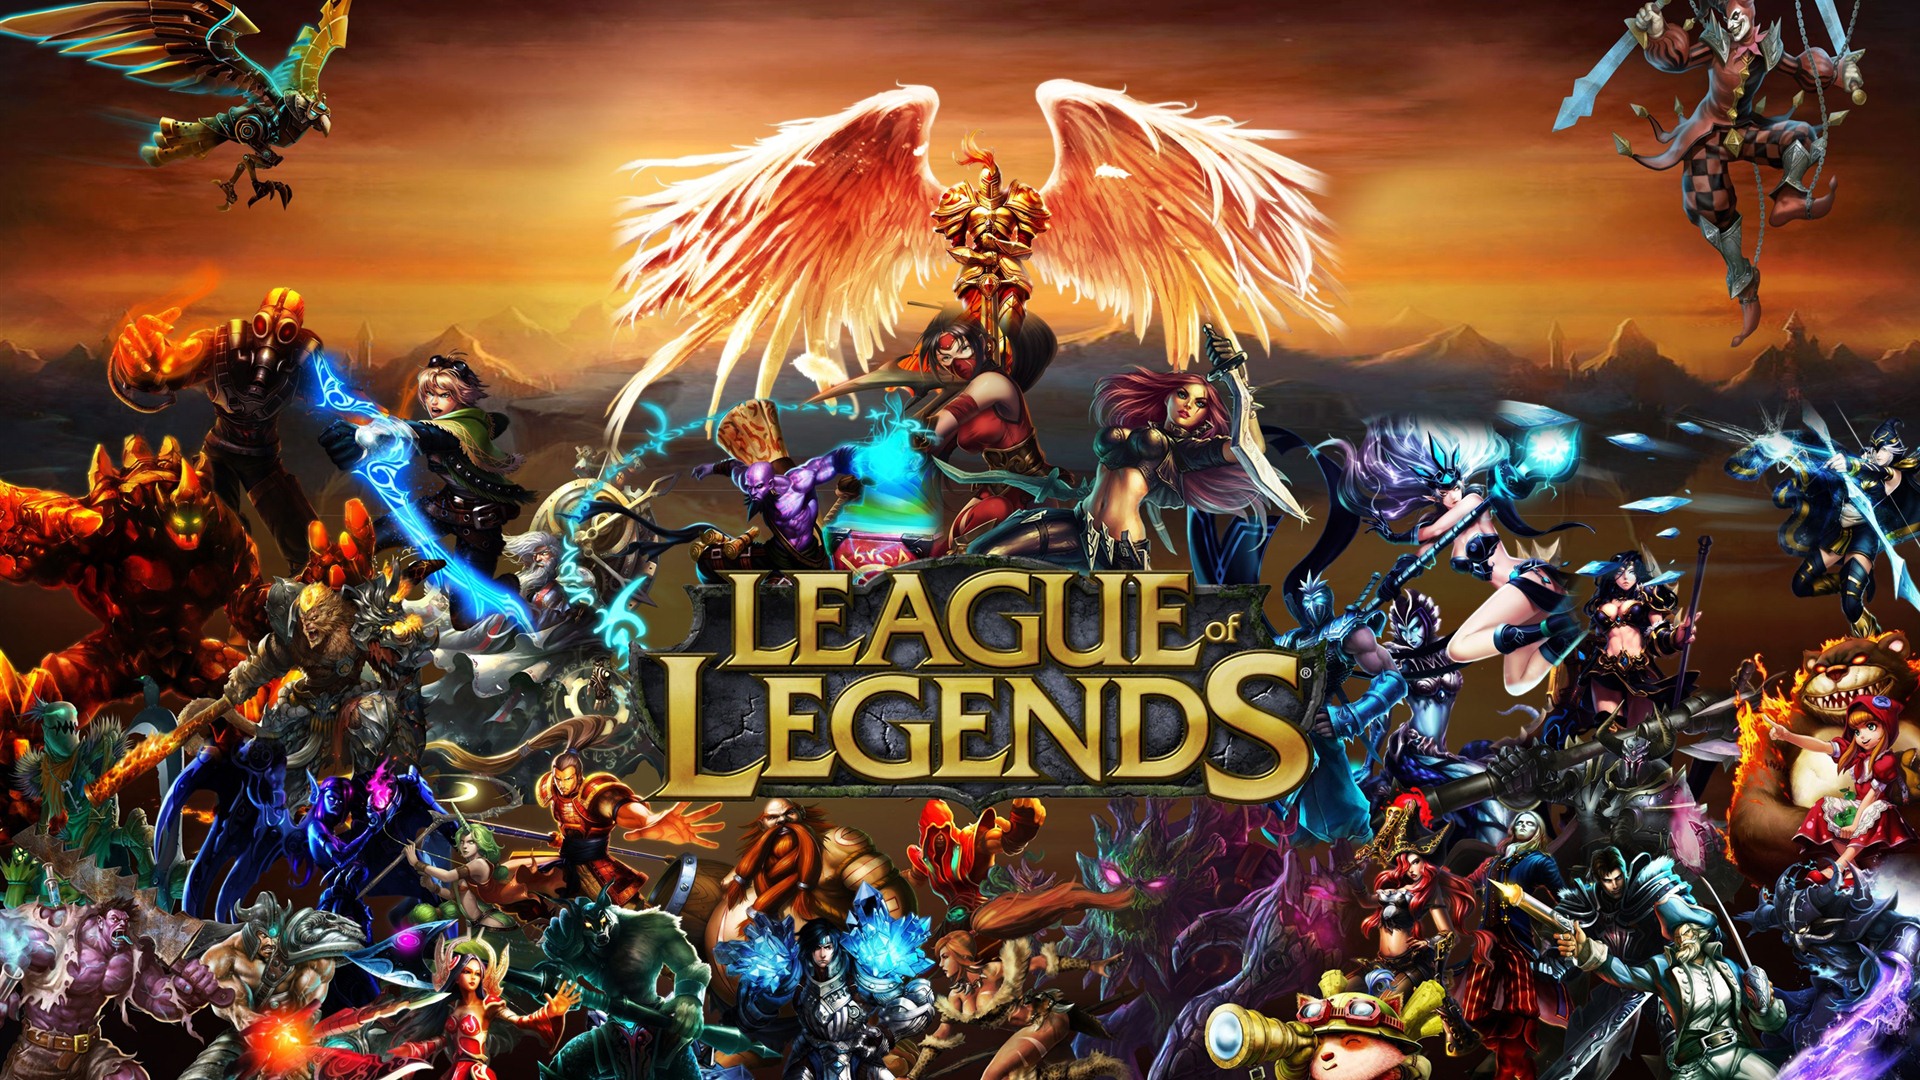 League of Legends game HD wallpapers #1 - 1920x1080